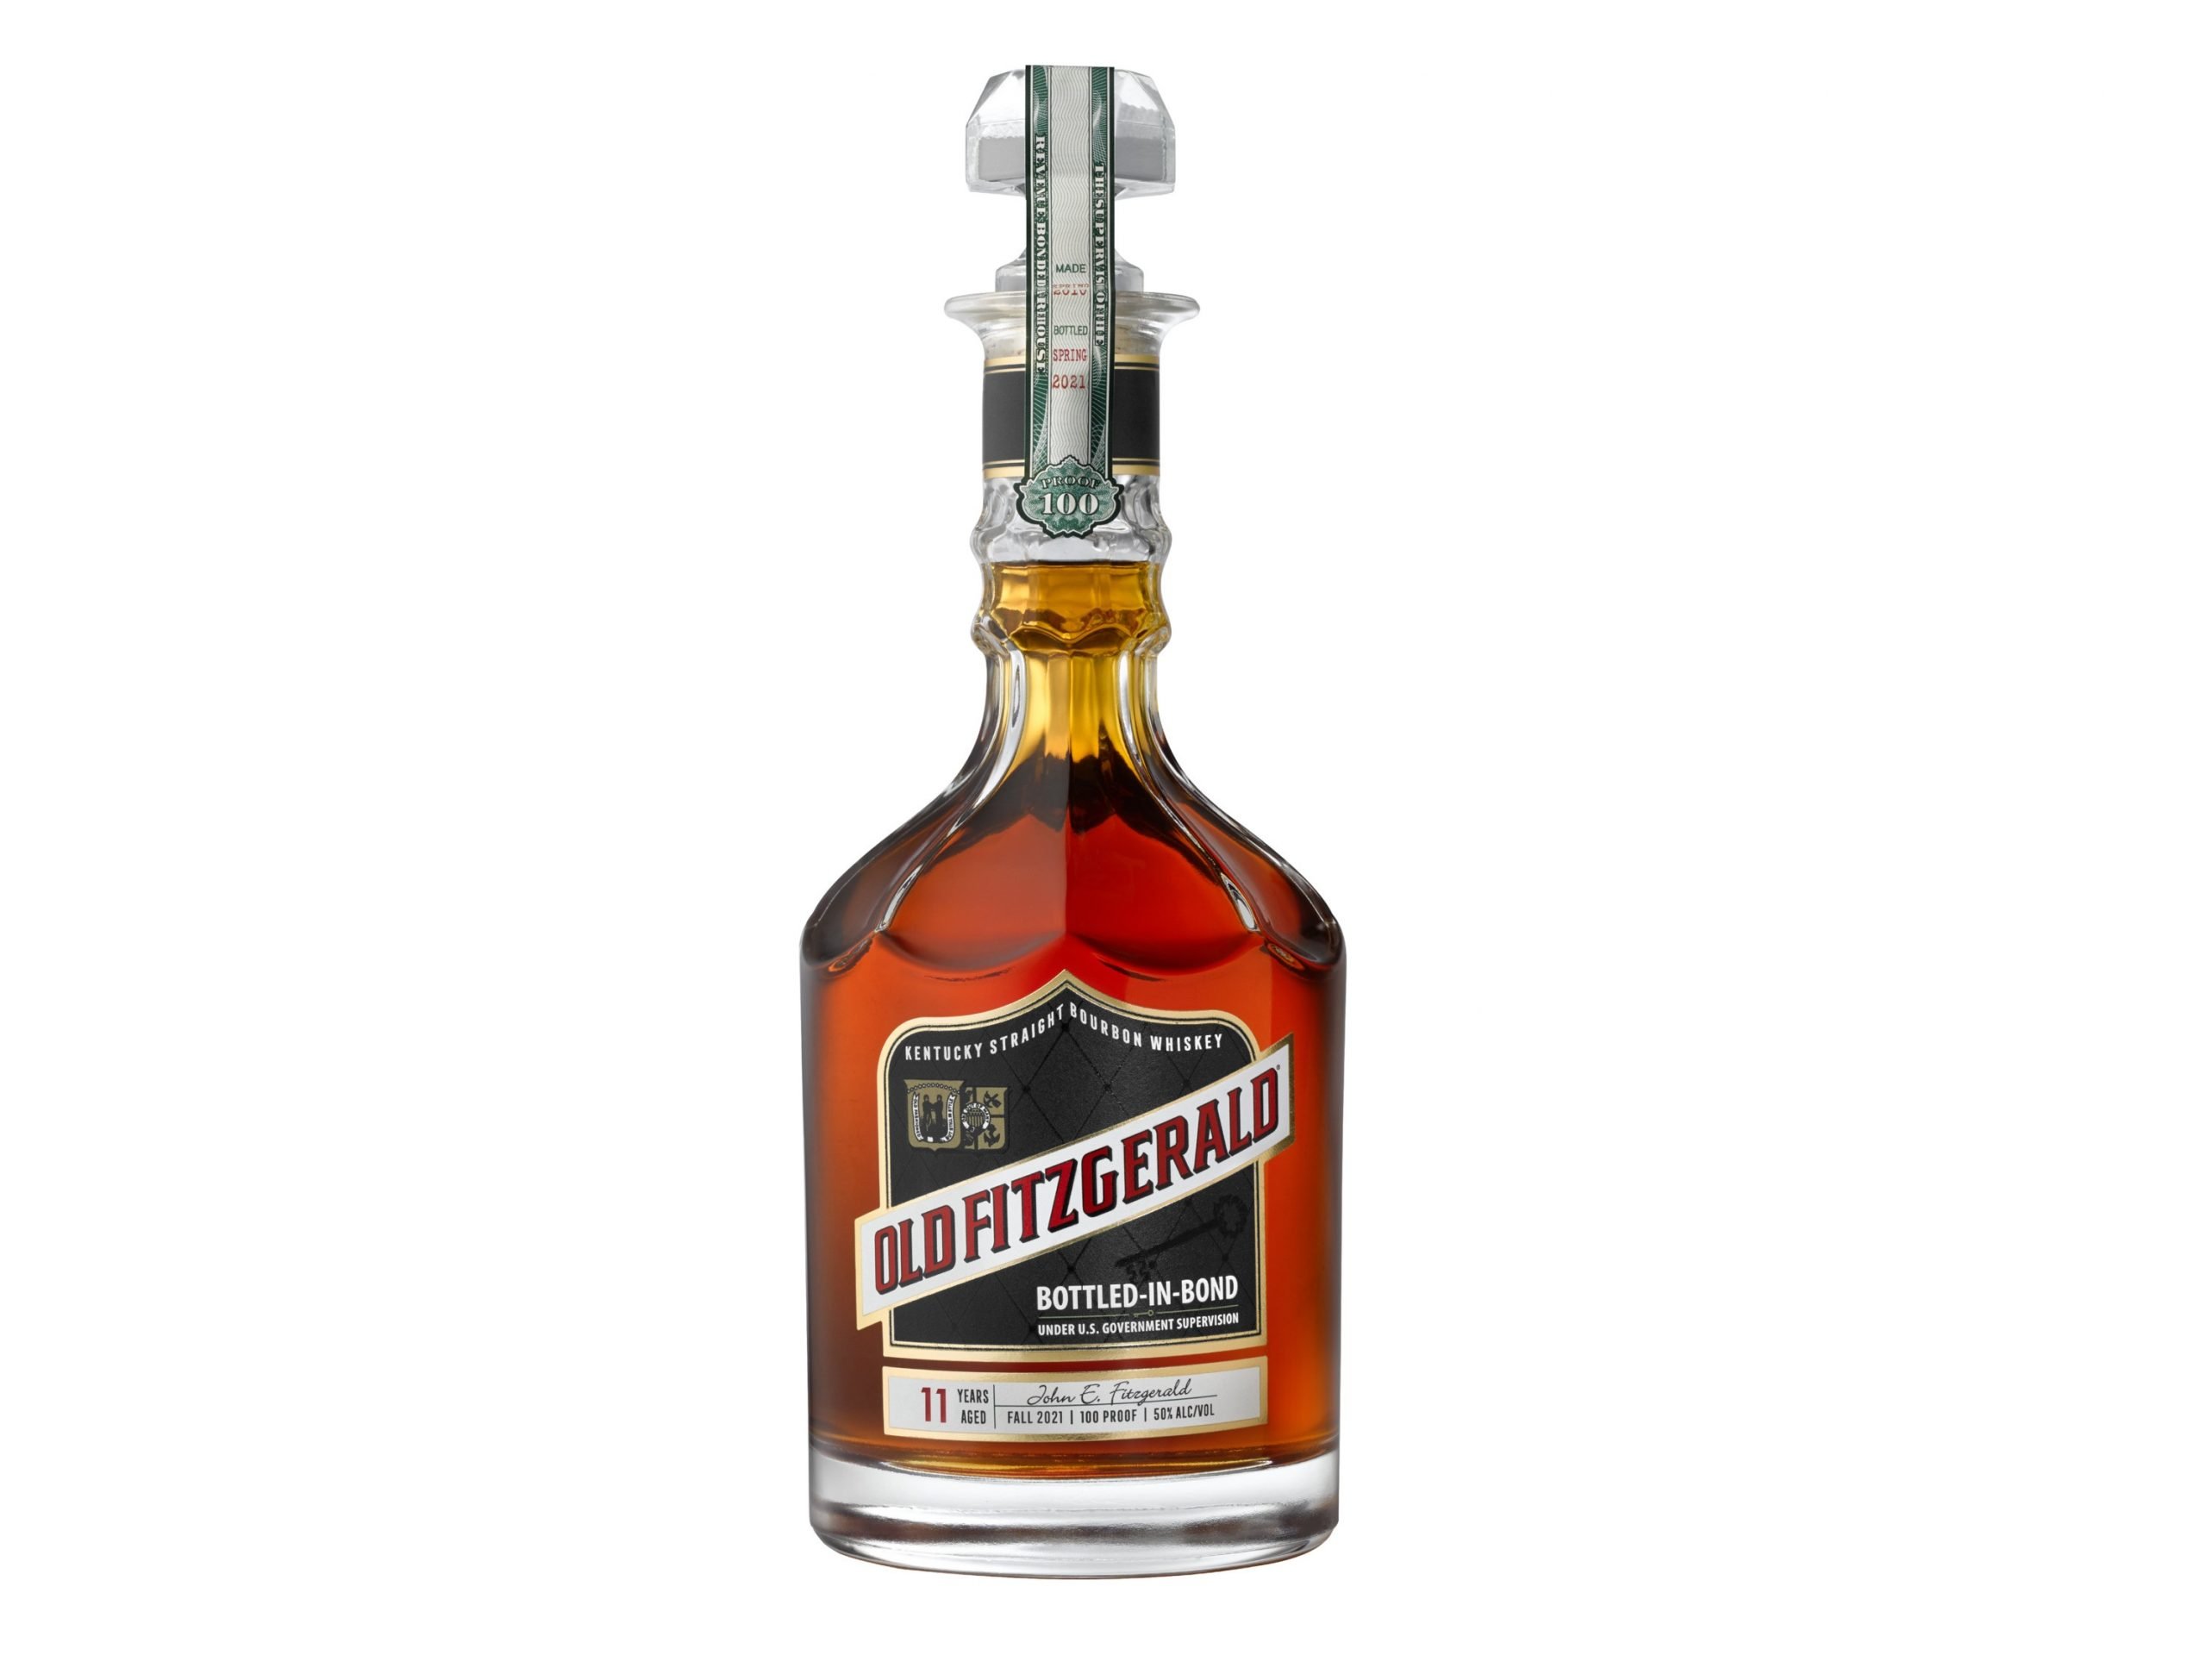 Old Fitzgerald Bottled-in-Bond 11 Years Old Fall 2021 Edition